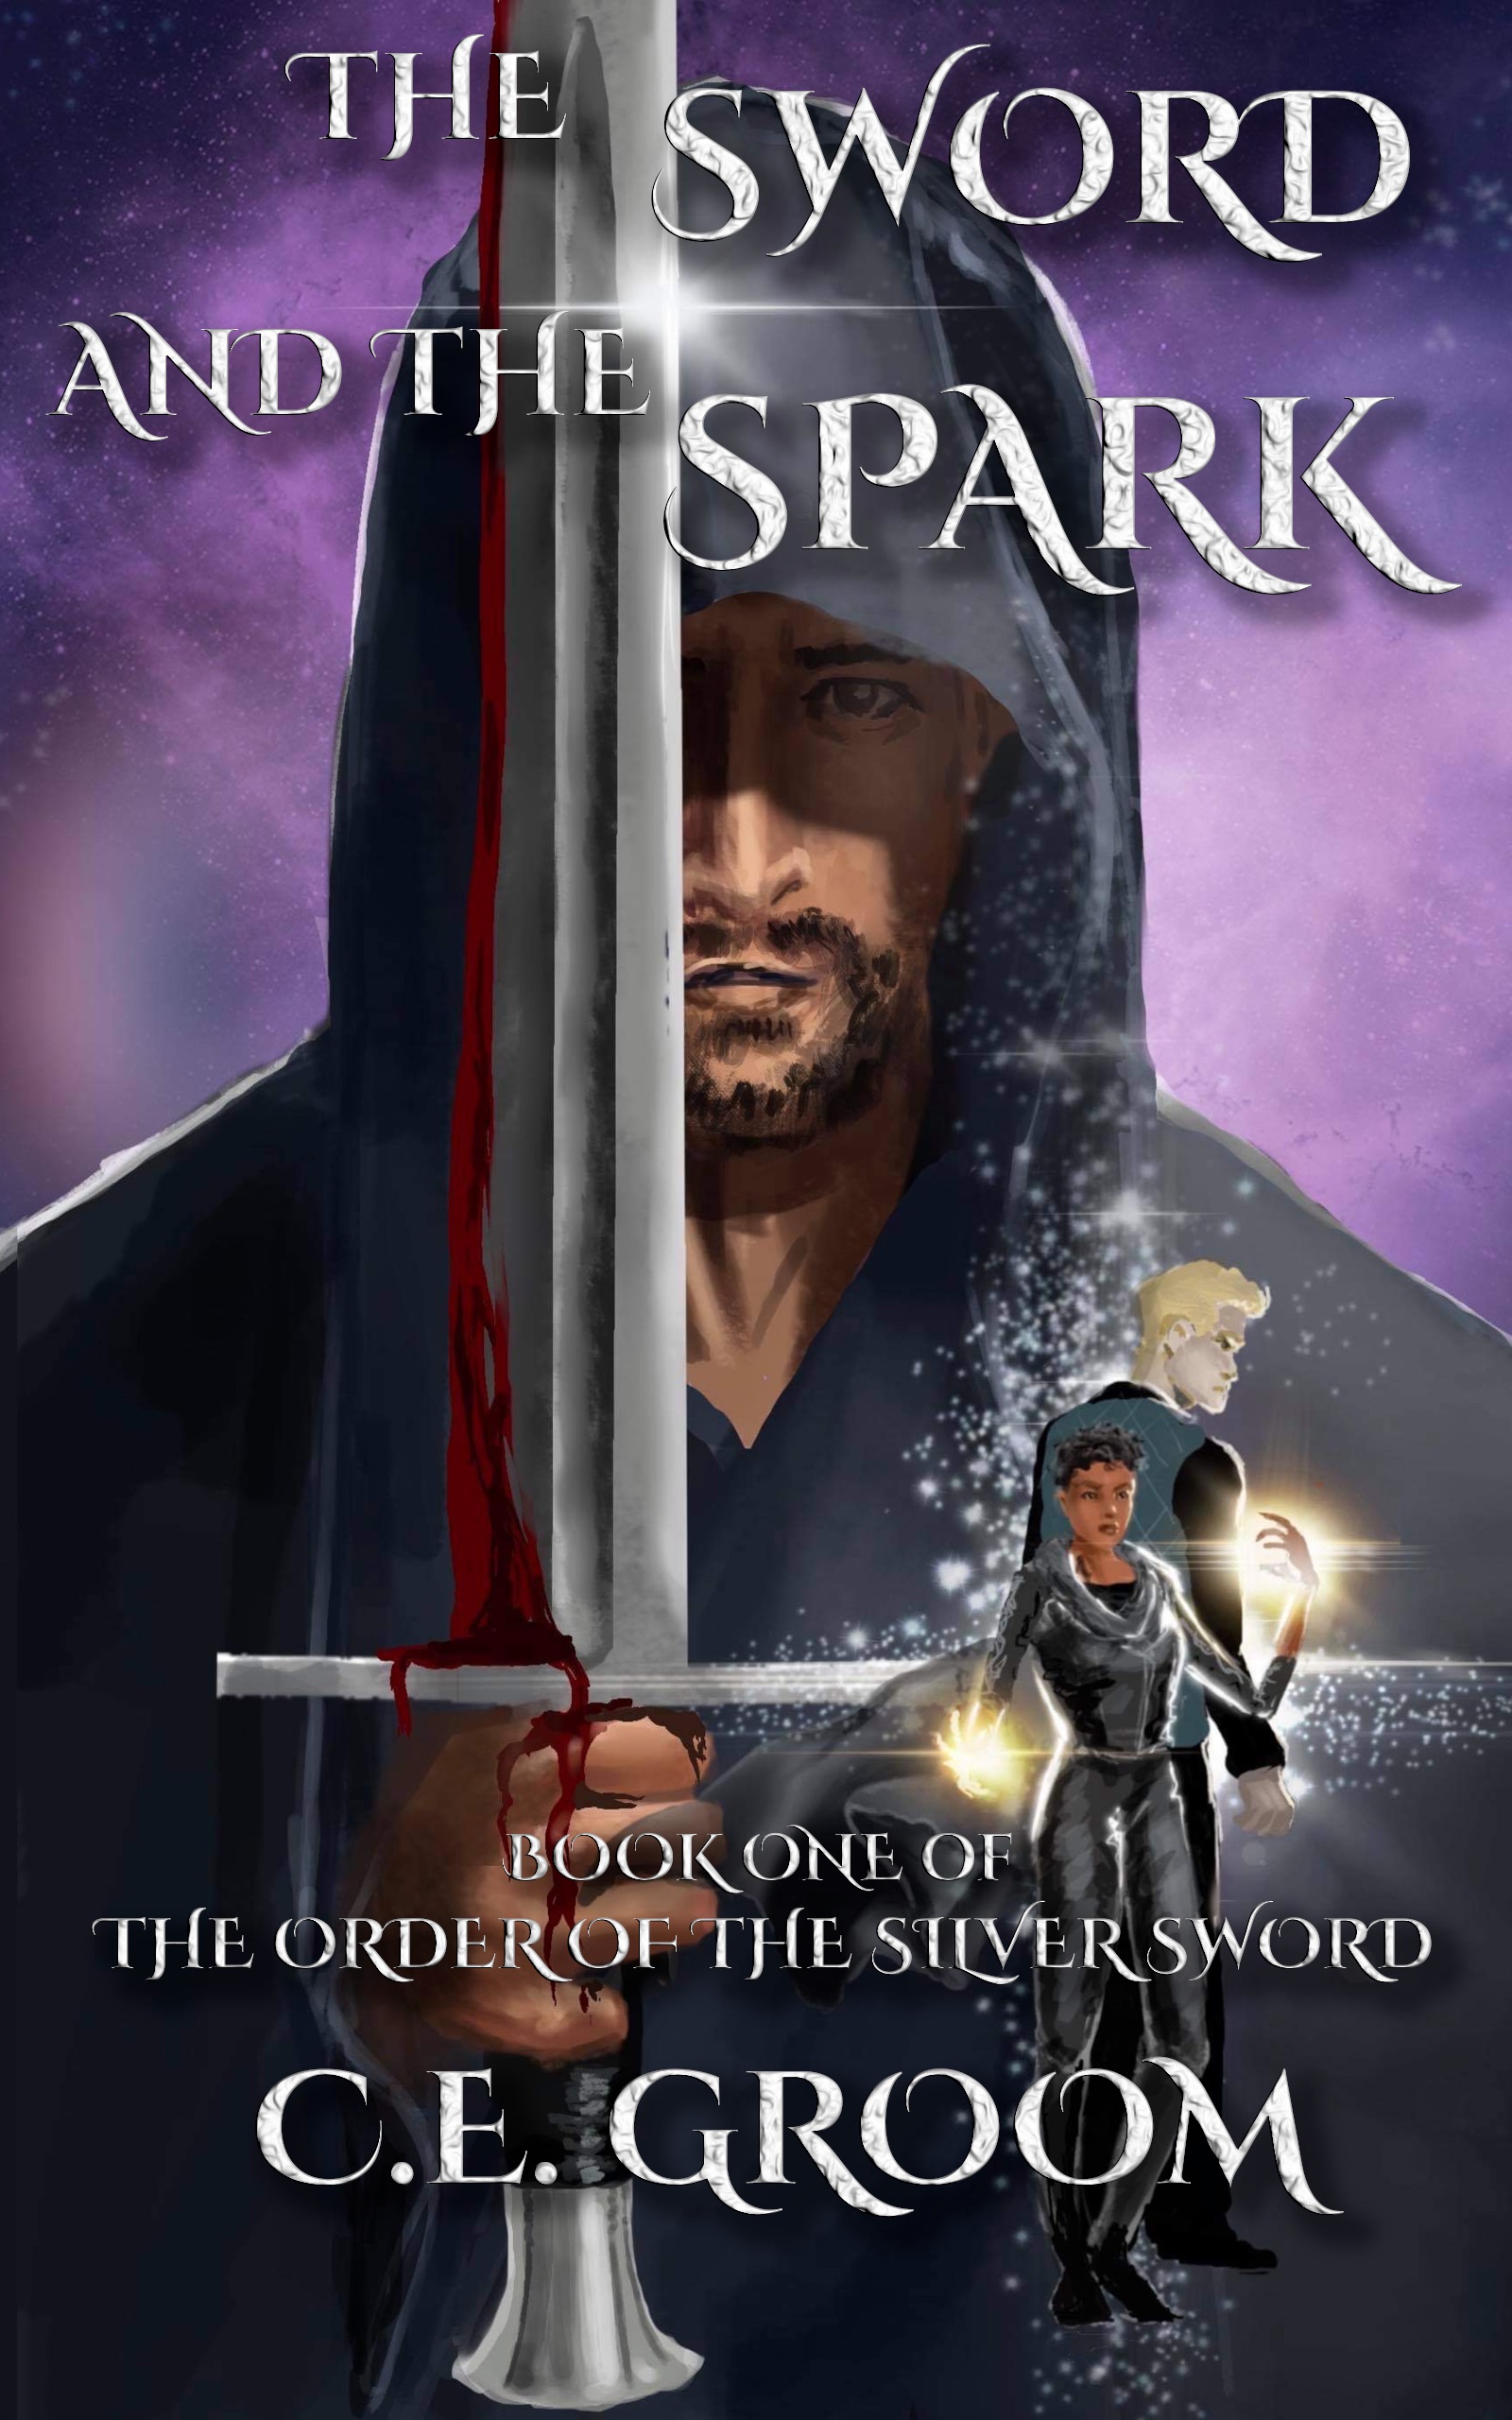 The Sword and the Spark: Book One of the Order of the Silver Sword